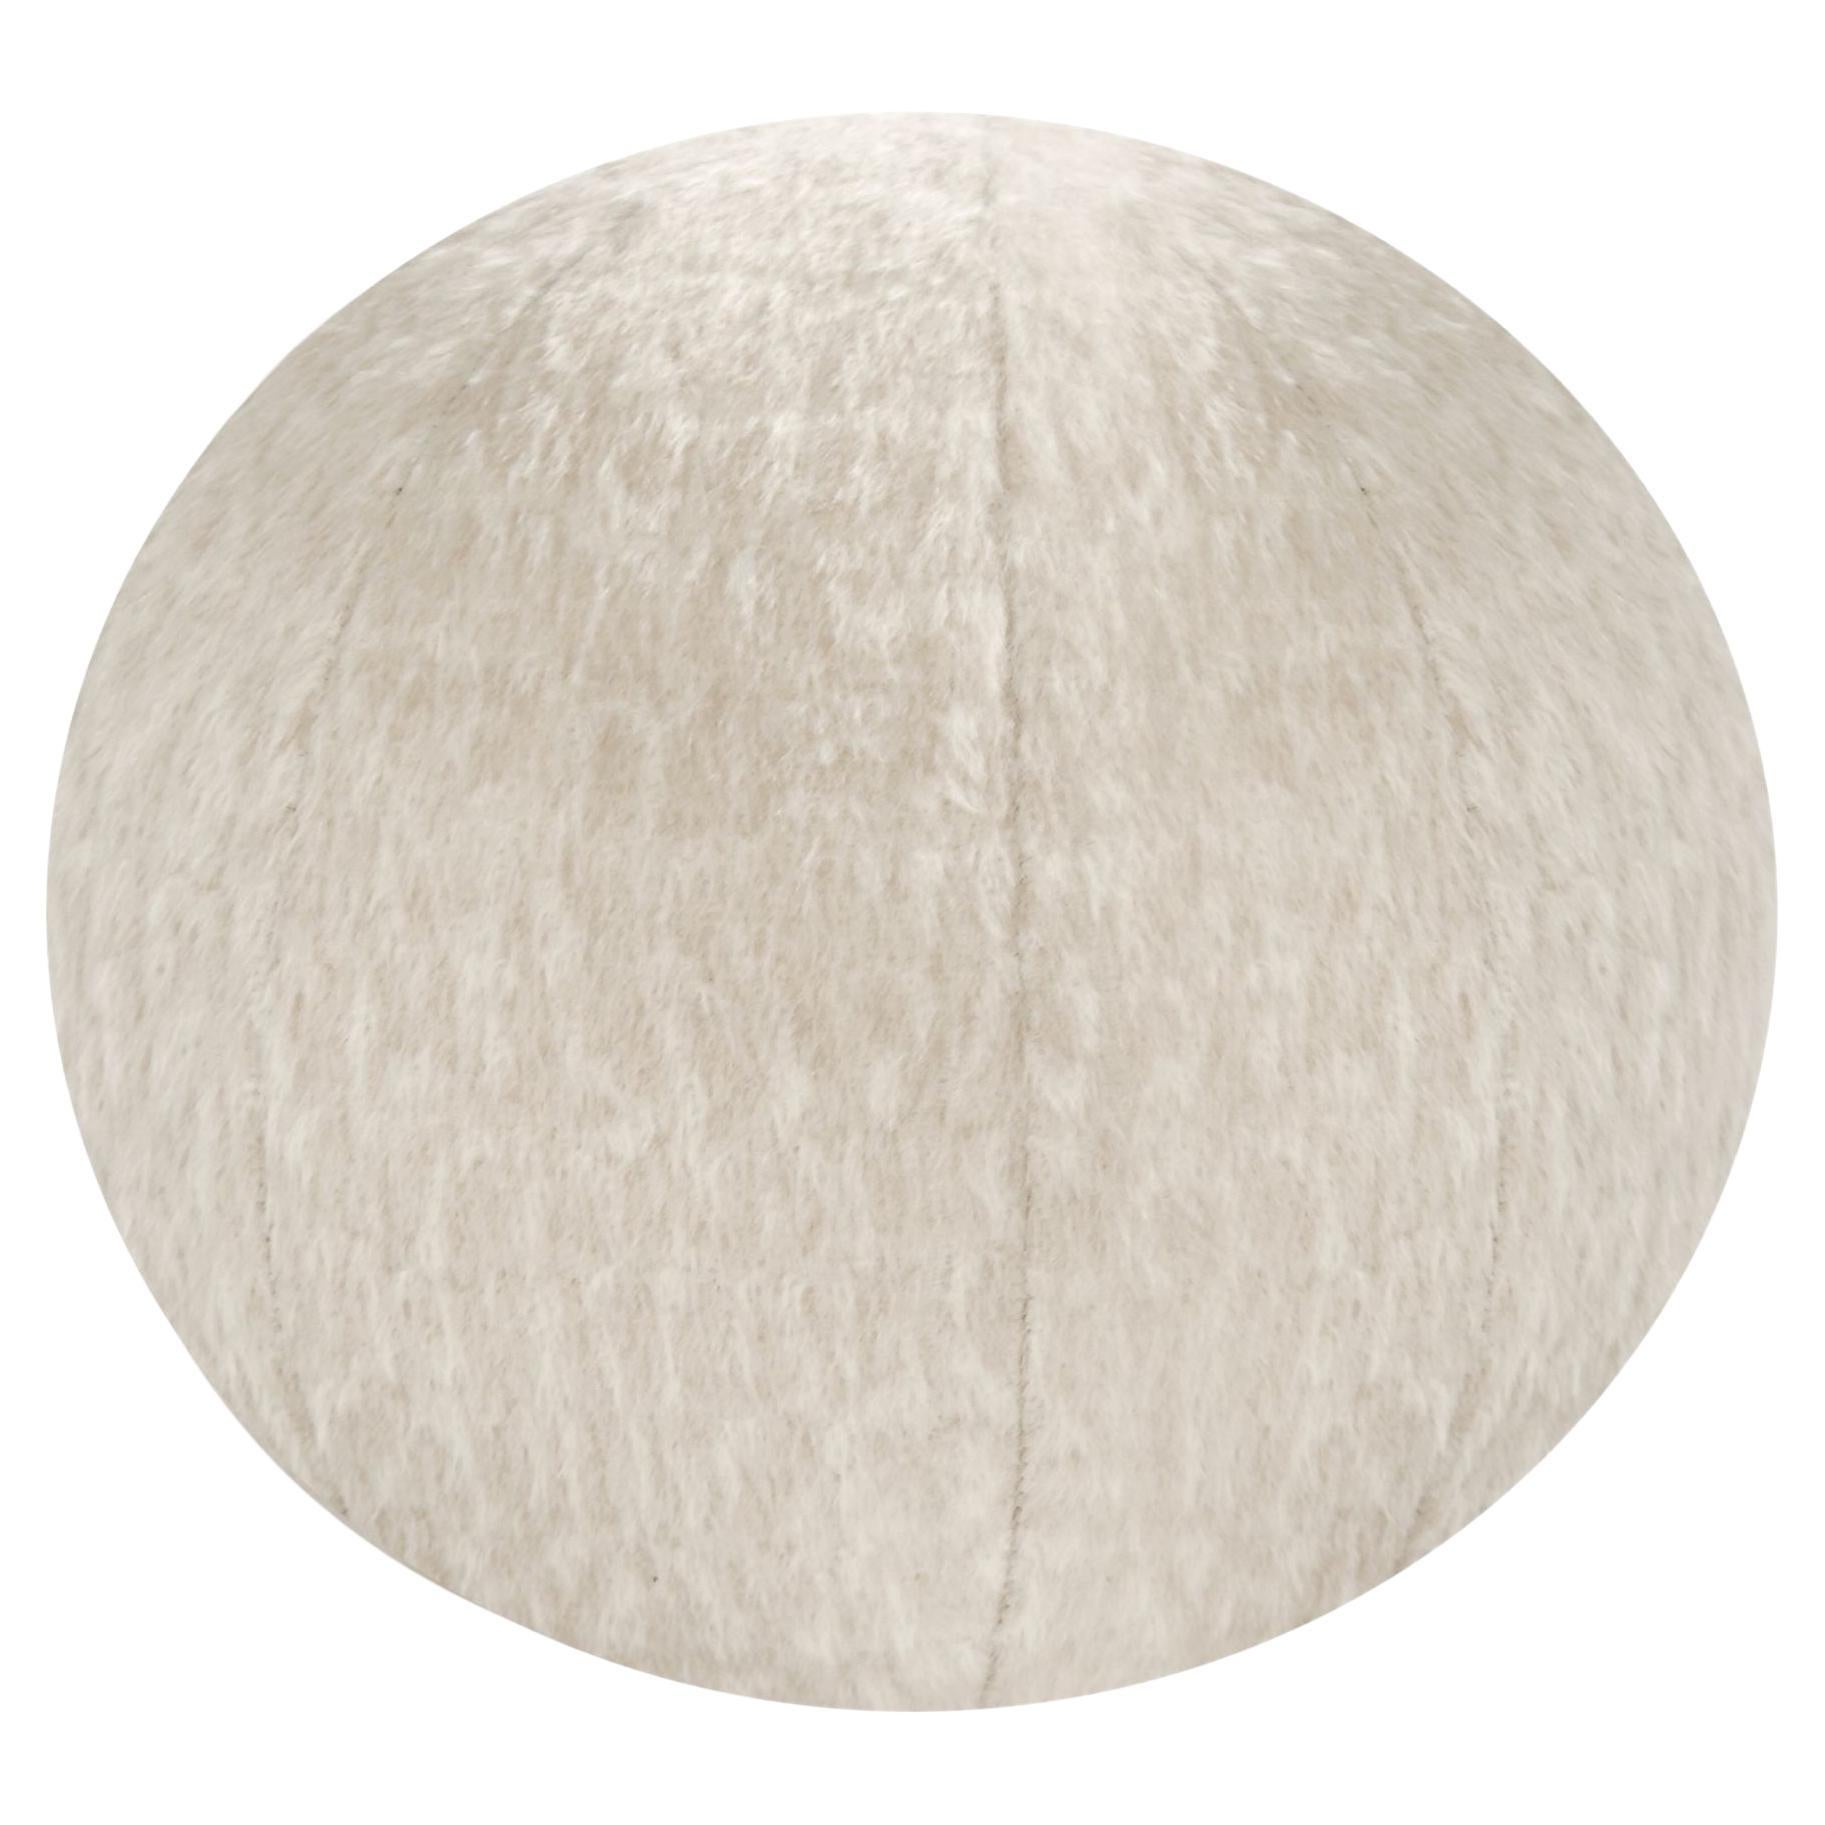 Orb Accent Pillow in Beige Alpaca by Holly Hunt